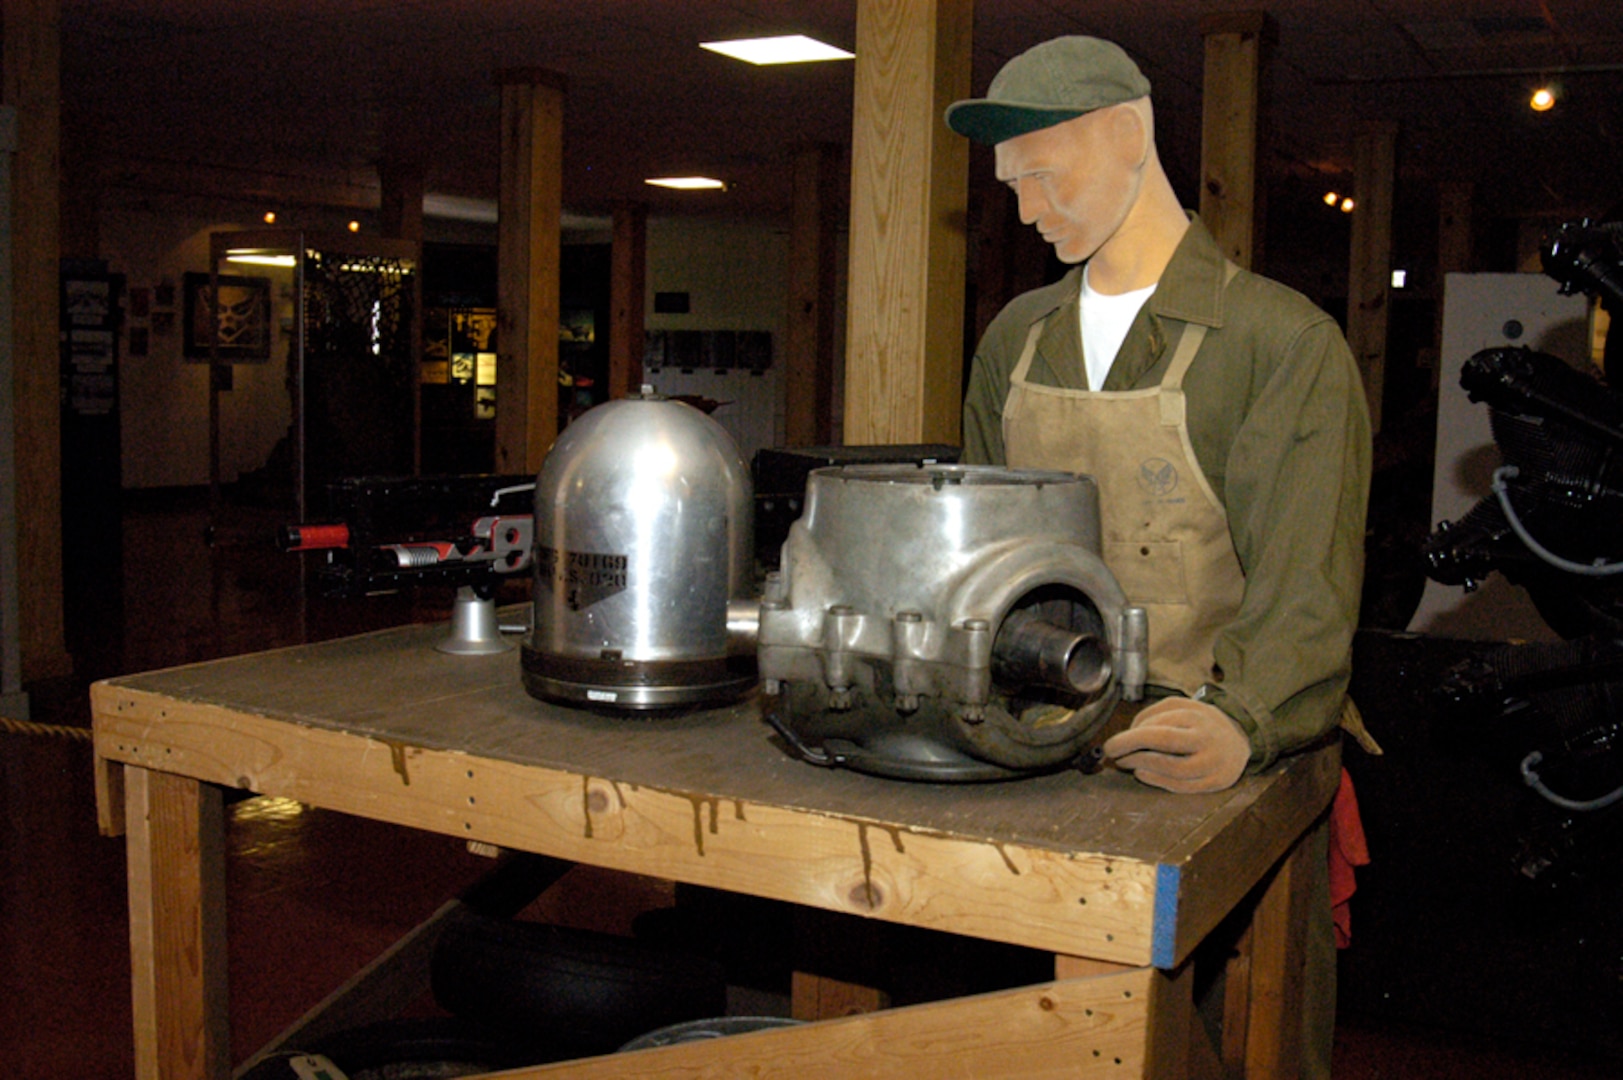 This display at the History and Traditions Museum on Lackland AFB shows an aviation mechanic in a maintenance shop repairing an engine propeller. The museum, located at the intersection of George Avenue and Nellis Street, is open Monday through Friday from 9 a.m. to 4 p.m. (USAF photo by Mandi Cruz)